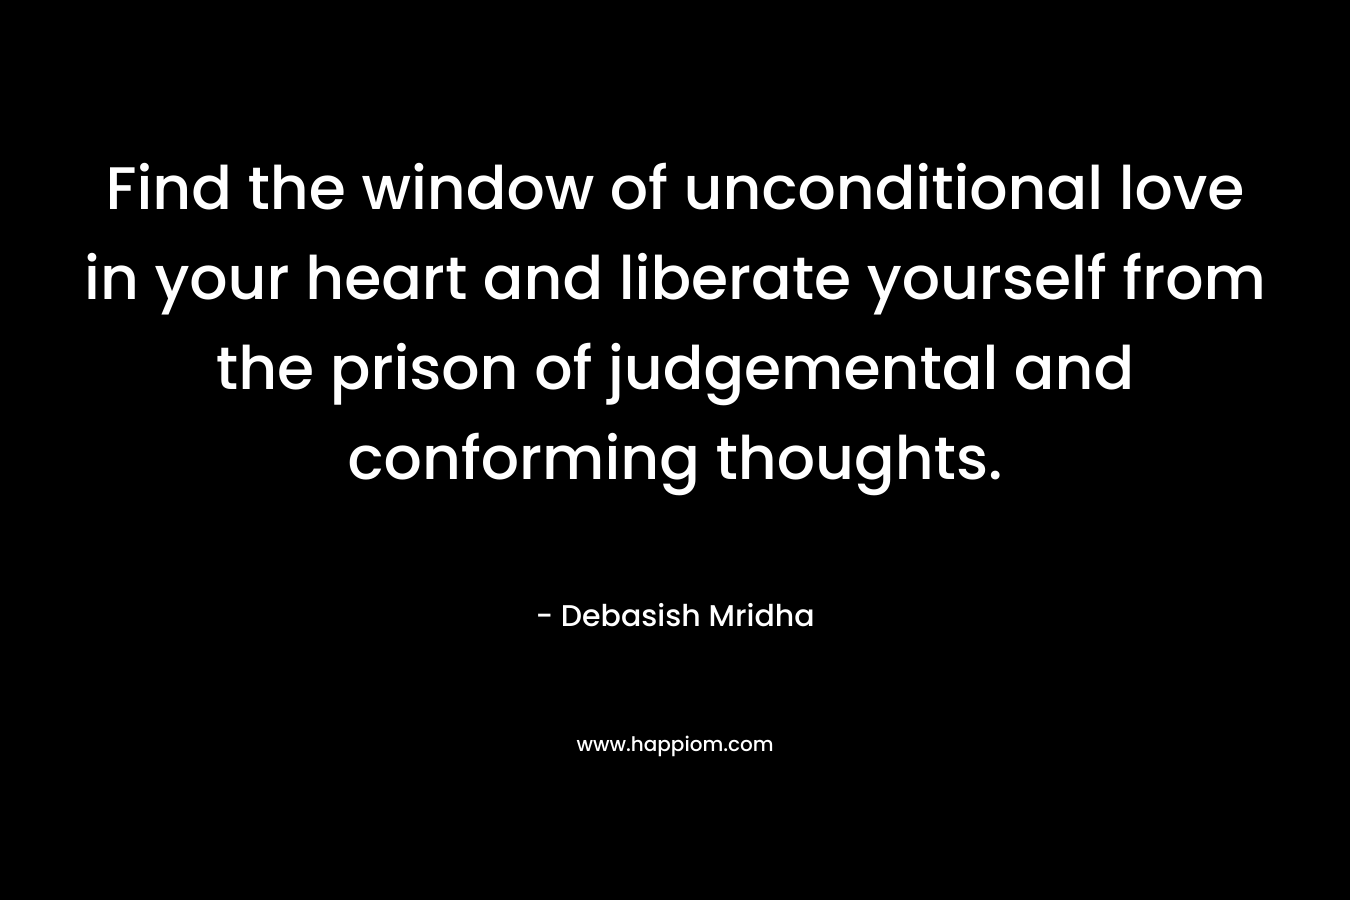 Find the window of unconditional love in your heart and liberate yourself from the prison of judgemental and conforming thoughts. – Debasish Mridha